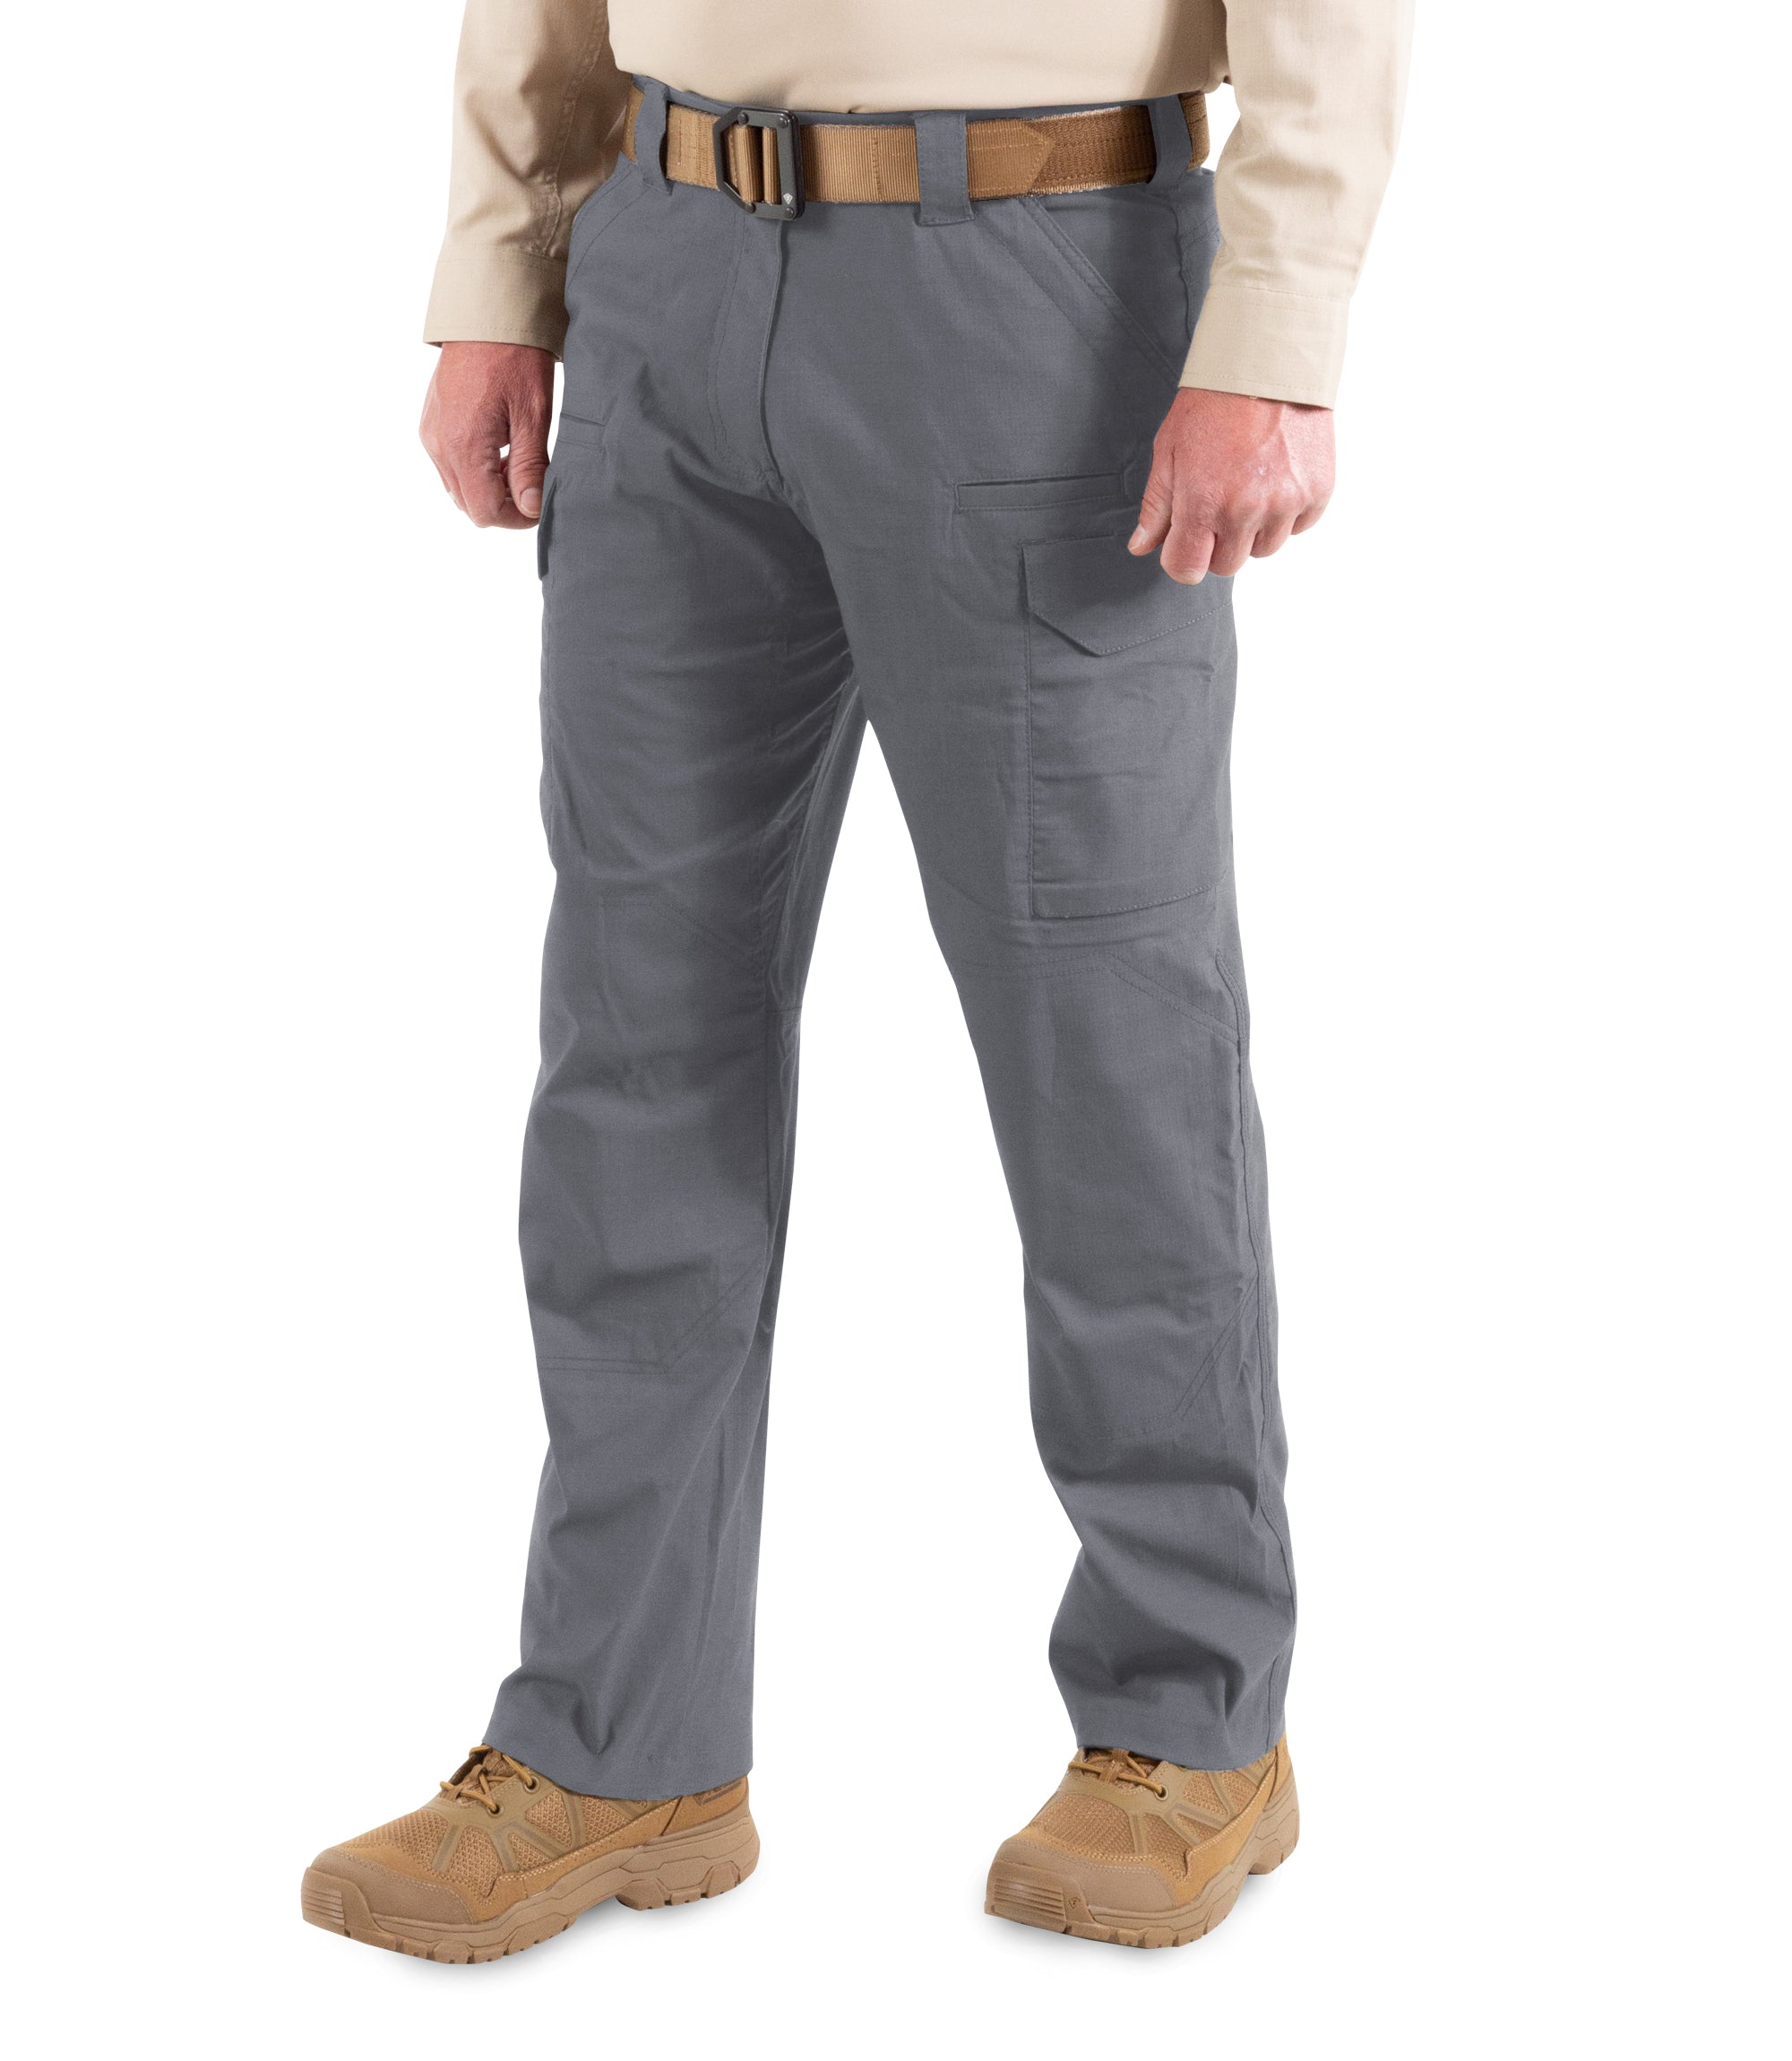 First Tactical - MEN'S V2 TACTICAL PANT - WOLF GREY